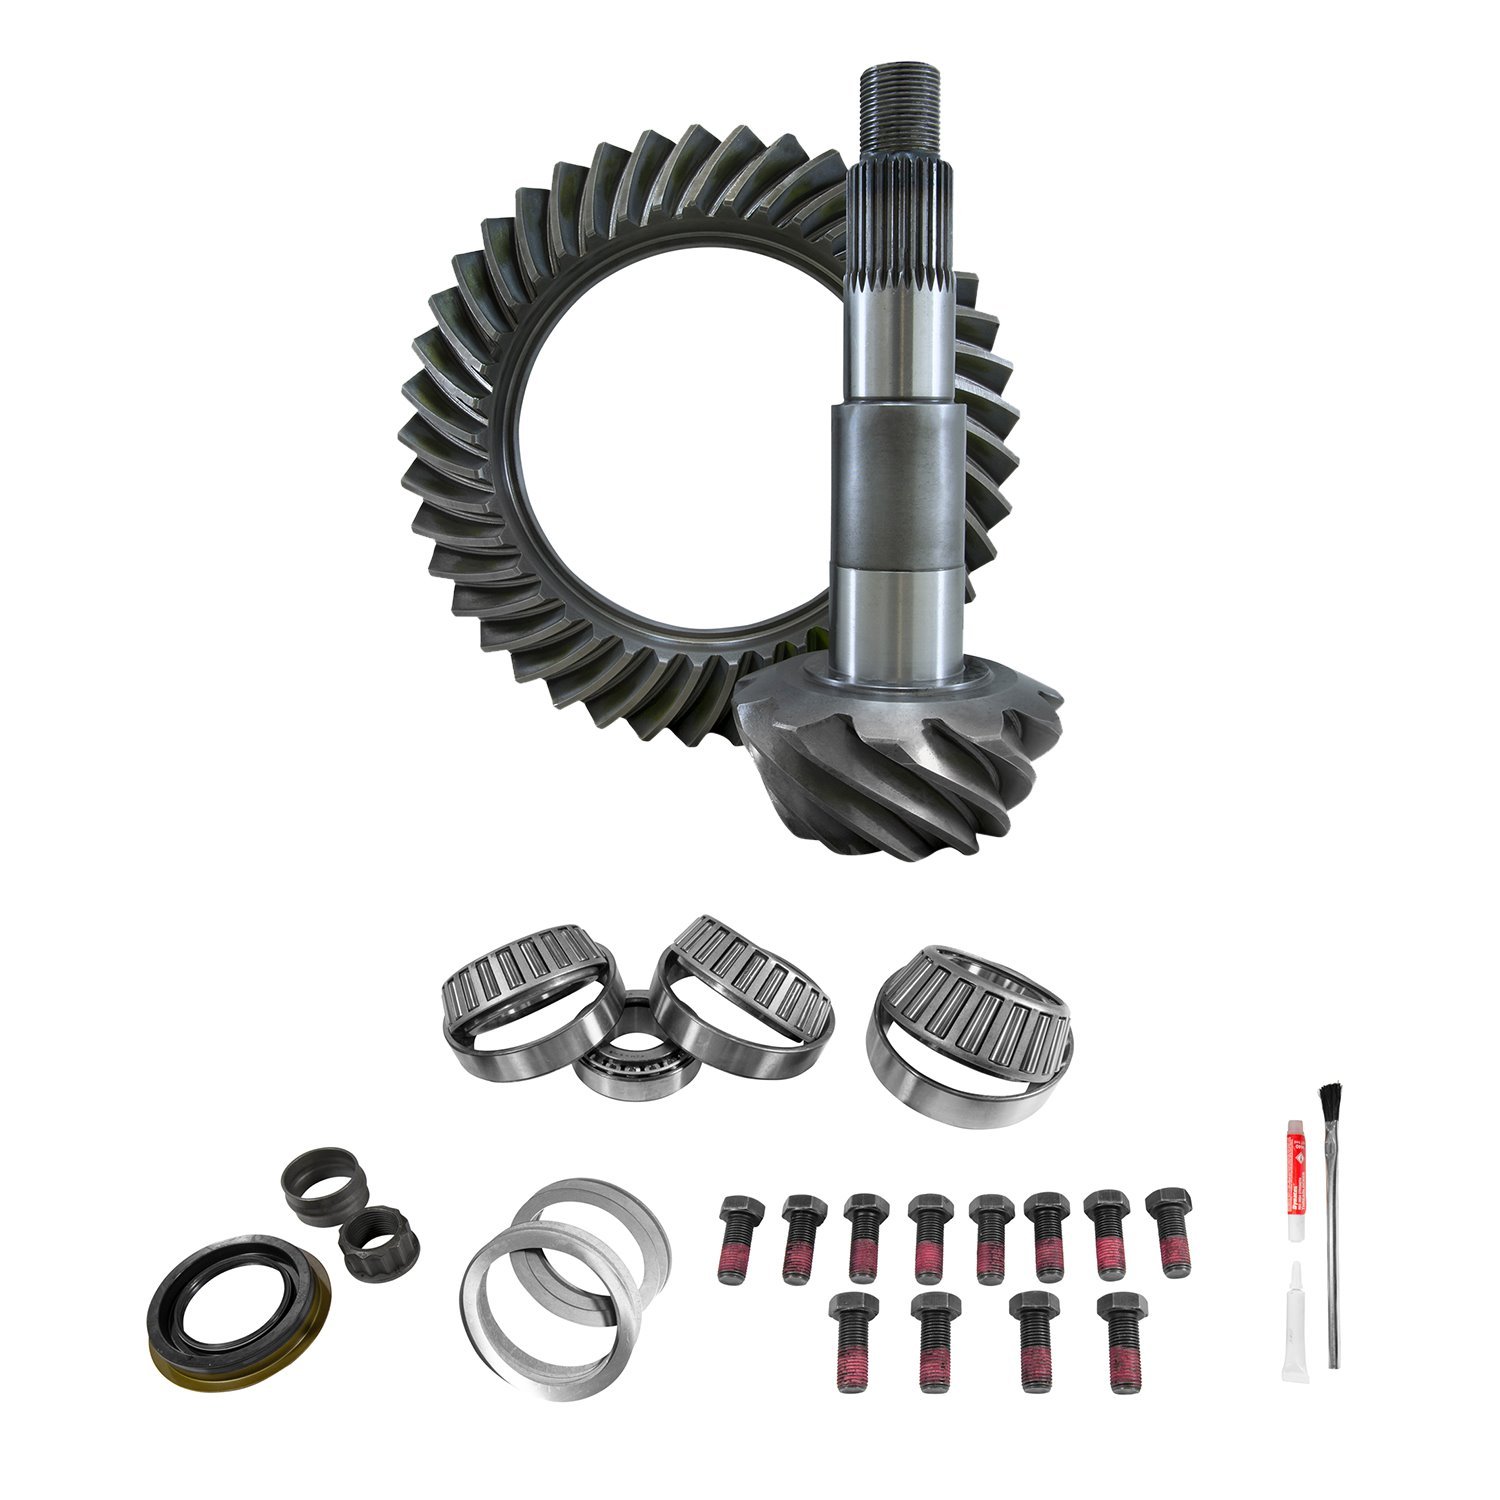 AAM115B1004 Ring & Pinion w/Installation Kit Bundle for 2001-2010 GM, Dodge 2500, 3500 Trucks 11.5 AAM Differential [4.11 Ratio]